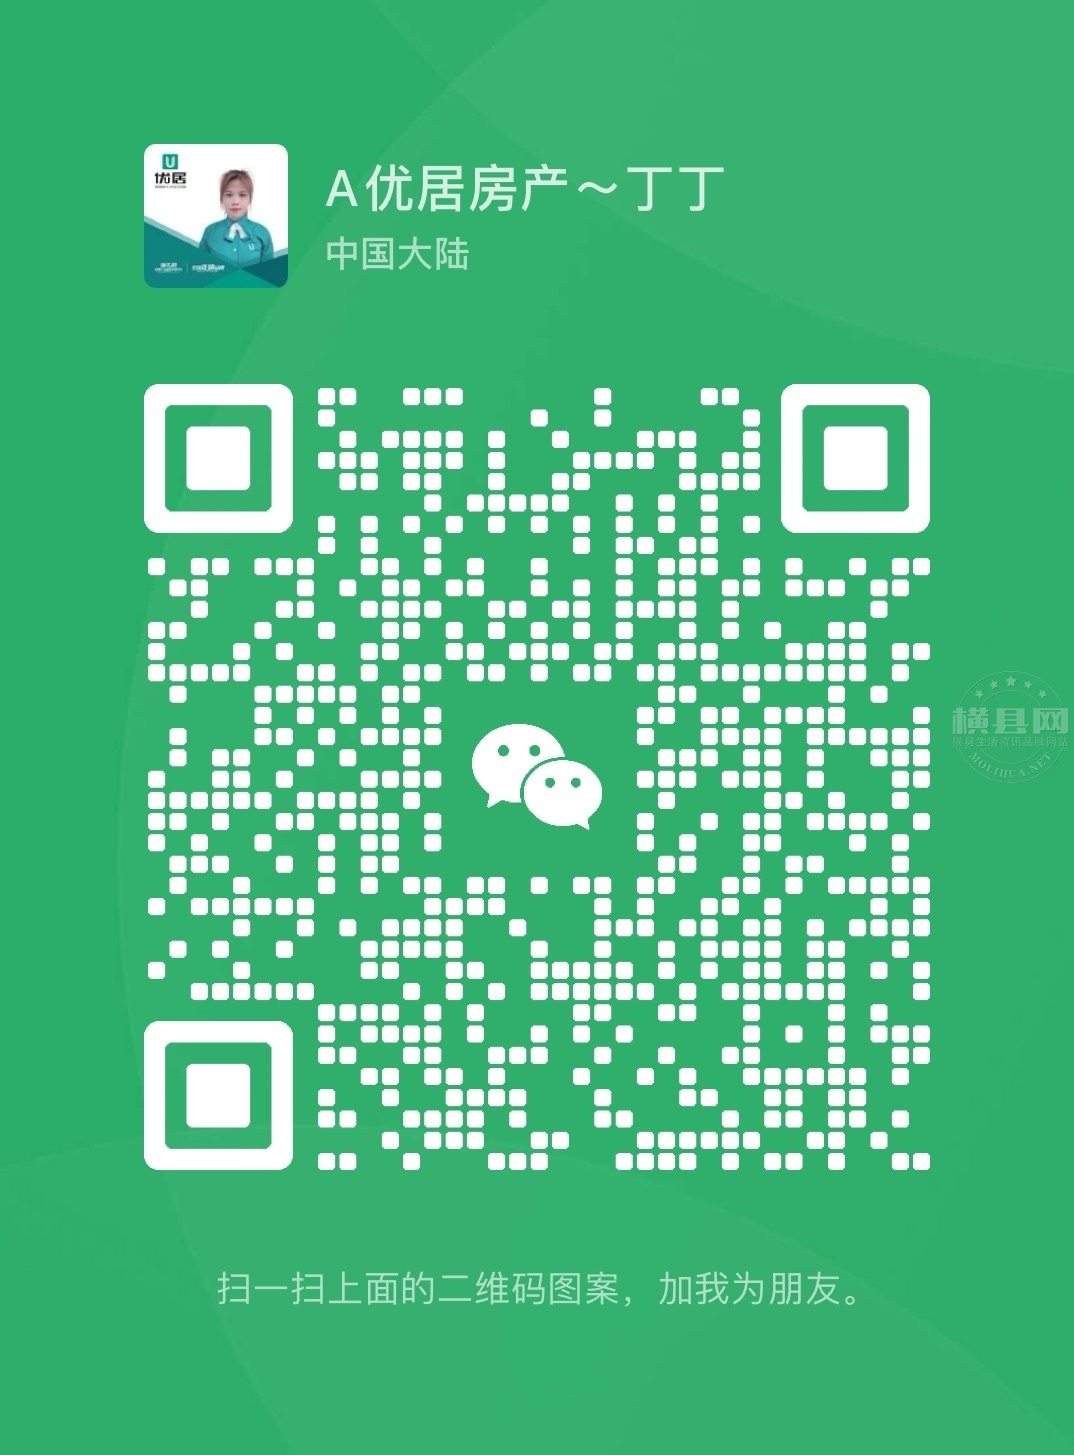 wechat_upload1714211714662ccb820aac8